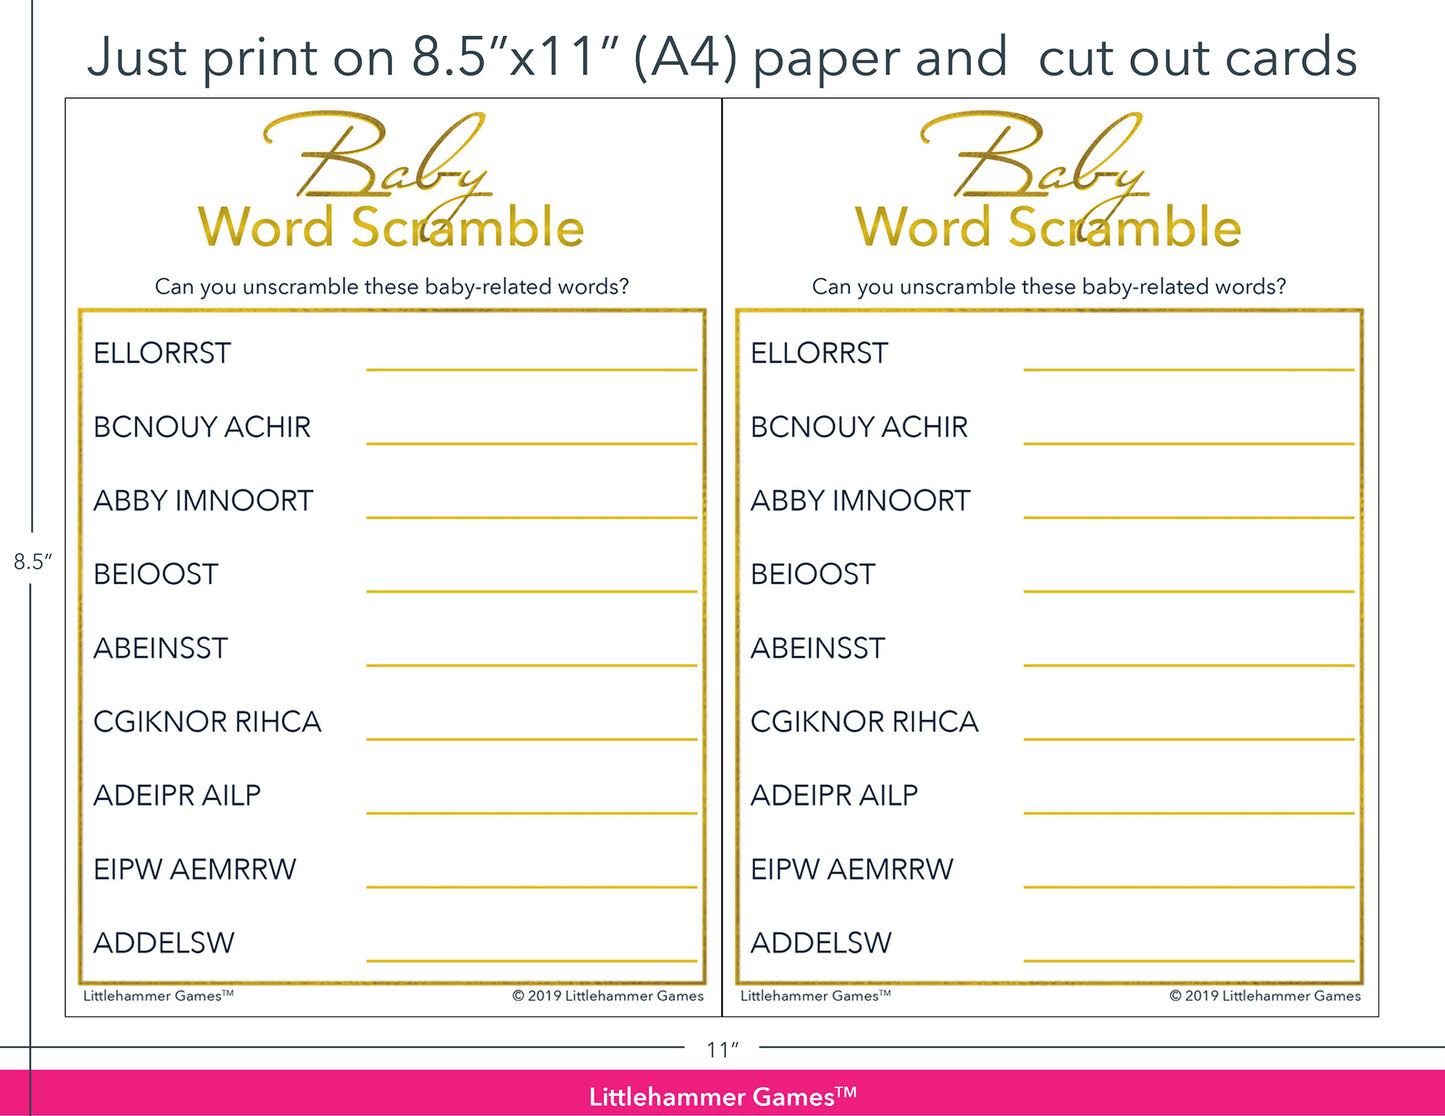 Baby Word Scramble gold game cards with printing instructions